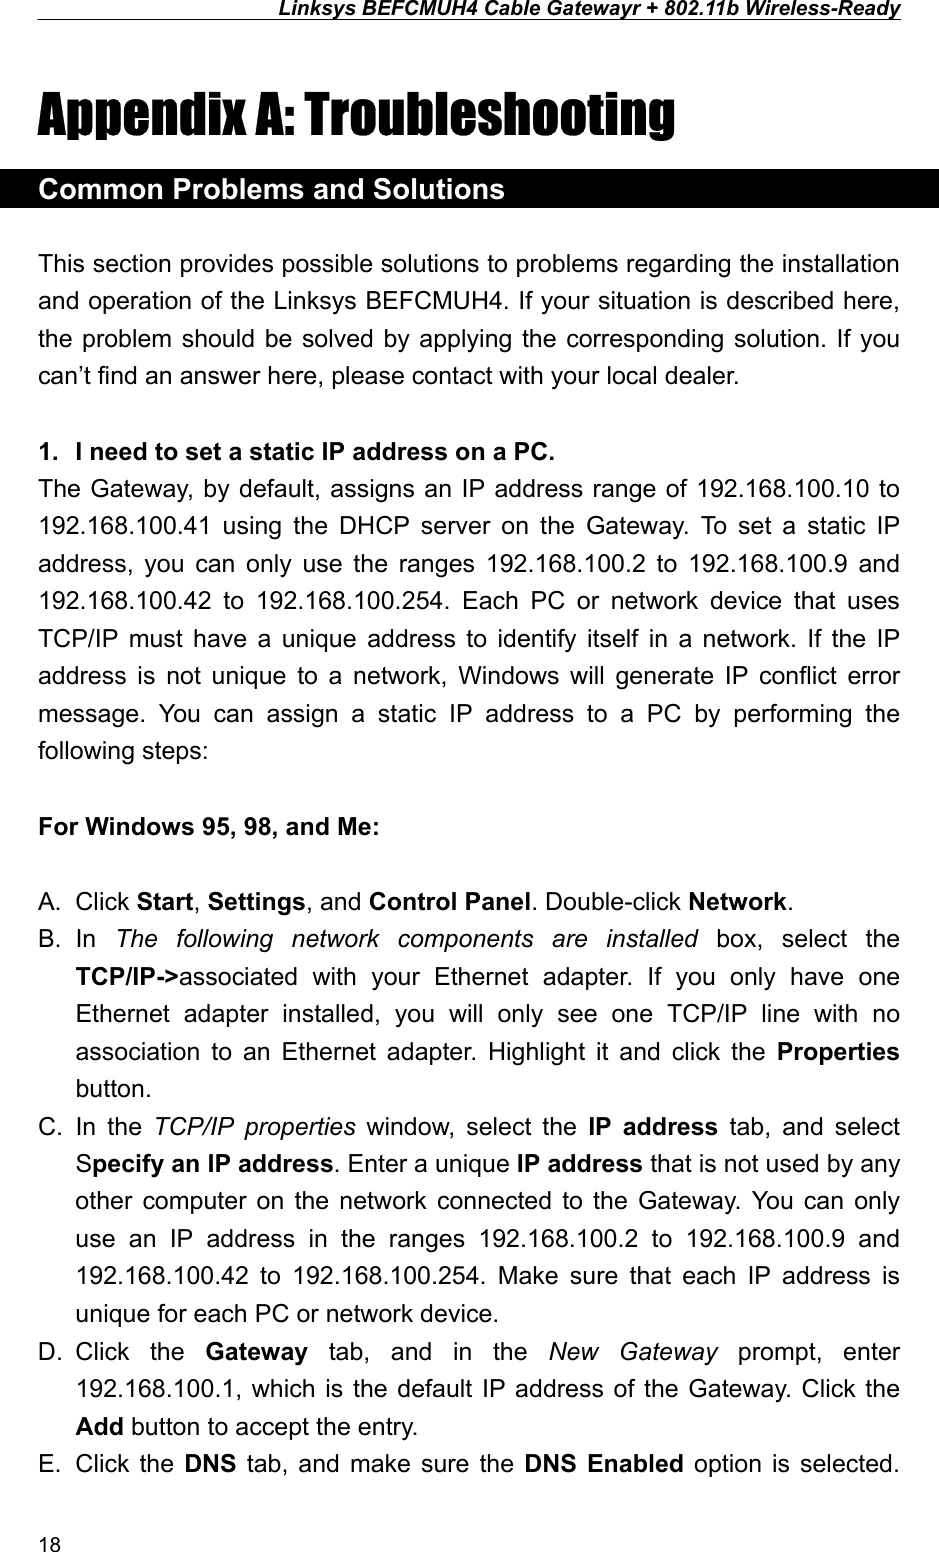 Linksys BEFCMUH4 Cable Gatewayr + 802.11b Wireless-Ready  Appendix A: Troubleshooting Common Problems and Solutions  This section provides possible solutions to problems regarding the installation and operation of the Linksys BEFCMUH4. If your situation is described here, the problem should be solved by applying the corresponding solution. If you can’t find an answer here, please contact with your local dealer.  1.  I need to set a static IP address on a PC. The Gateway, by default, assigns an IP address range of 192.168.100.10 to 192.168.100.41 using the DHCP server on the Gateway. To set a static IP address, you can only use the ranges 192.168.100.2 to 192.168.100.9 and 192.168.100.42 to 192.168.100.254. Each PC or network device that uses TCP/IP must have a unique address to identify itself in a network. If the IP address is not unique to a network, Windows will generate IP conflict error message. You can assign a static IP address to a PC by performing the following steps:  For Windows 95, 98, and Me:  A. Click Start, Settings, and Control Panel. Double-click Network. B. In  The following network components are installed box, select the TCP/IP-&gt;associated with your Ethernet adapter. If you only have one Ethernet adapter installed, you will only see one TCP/IP line with no association to an Ethernet adapter. Highlight it and click the Properties button. C. In the TCP/IP properties window, select the IP address tab, and select Specify an IP address. Enter a unique IP address that is not used by any other computer on the network connected to the Gateway. You can only use an IP address in the ranges 192.168.100.2 to 192.168.100.9 and 192.168.100.42 to 192.168.100.254. Make sure that each IP address is unique for each PC or network device. D. Click  the  Gateway tab, and in the New Gateway prompt, enter 192.168.100.1, which is the default IP address of the Gateway. Click the Add button to accept the entry. E. Click the DNS tab, and make sure the DNS Enabled option is selected. 18 